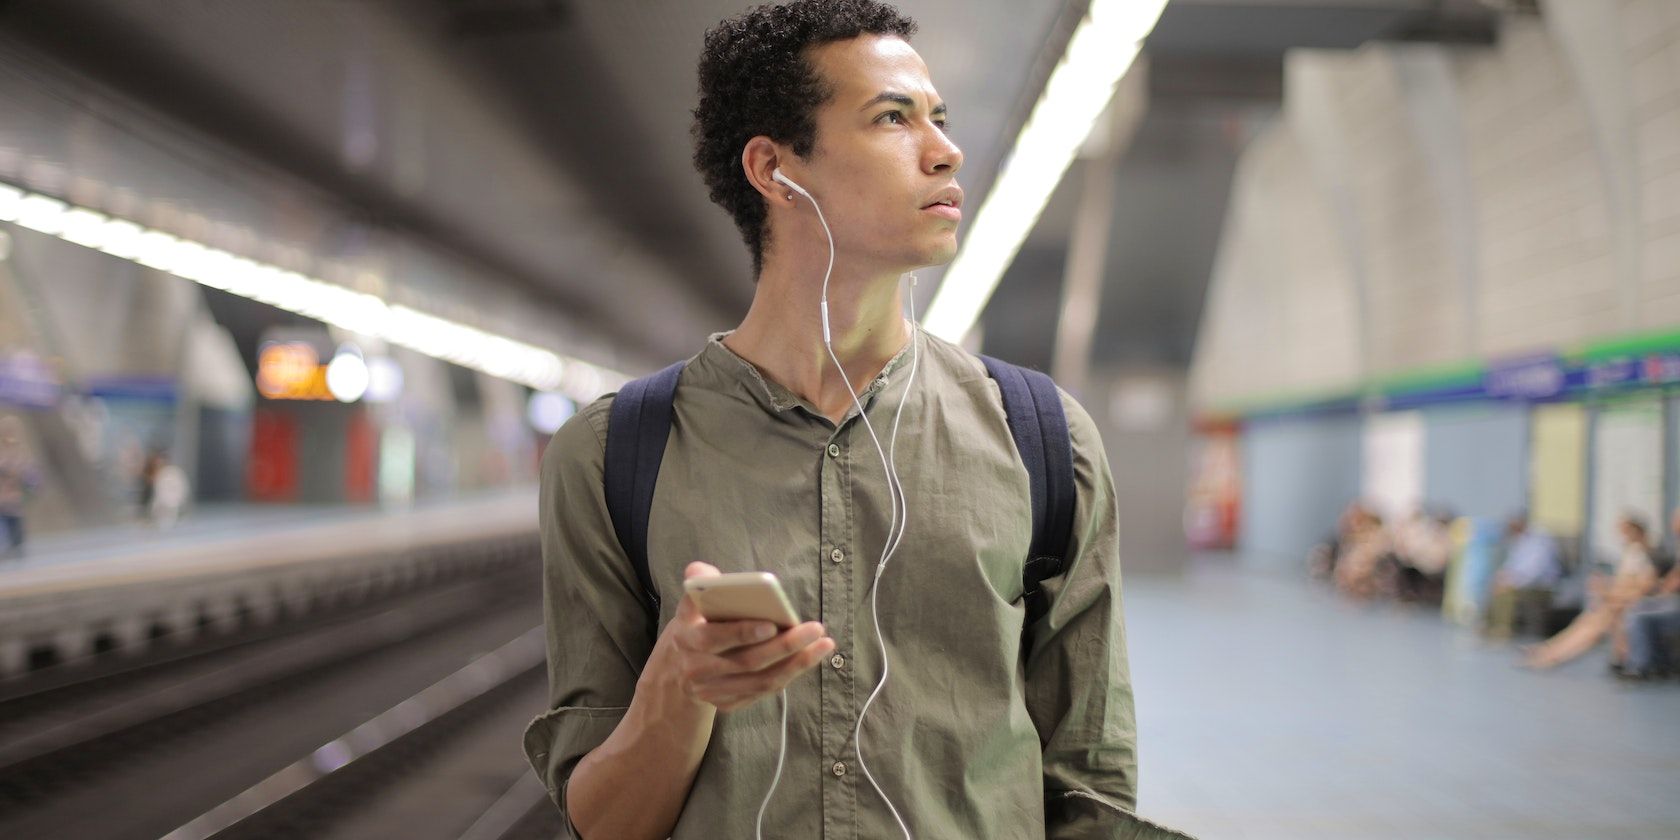 A man listening on headphones in a busy terminal